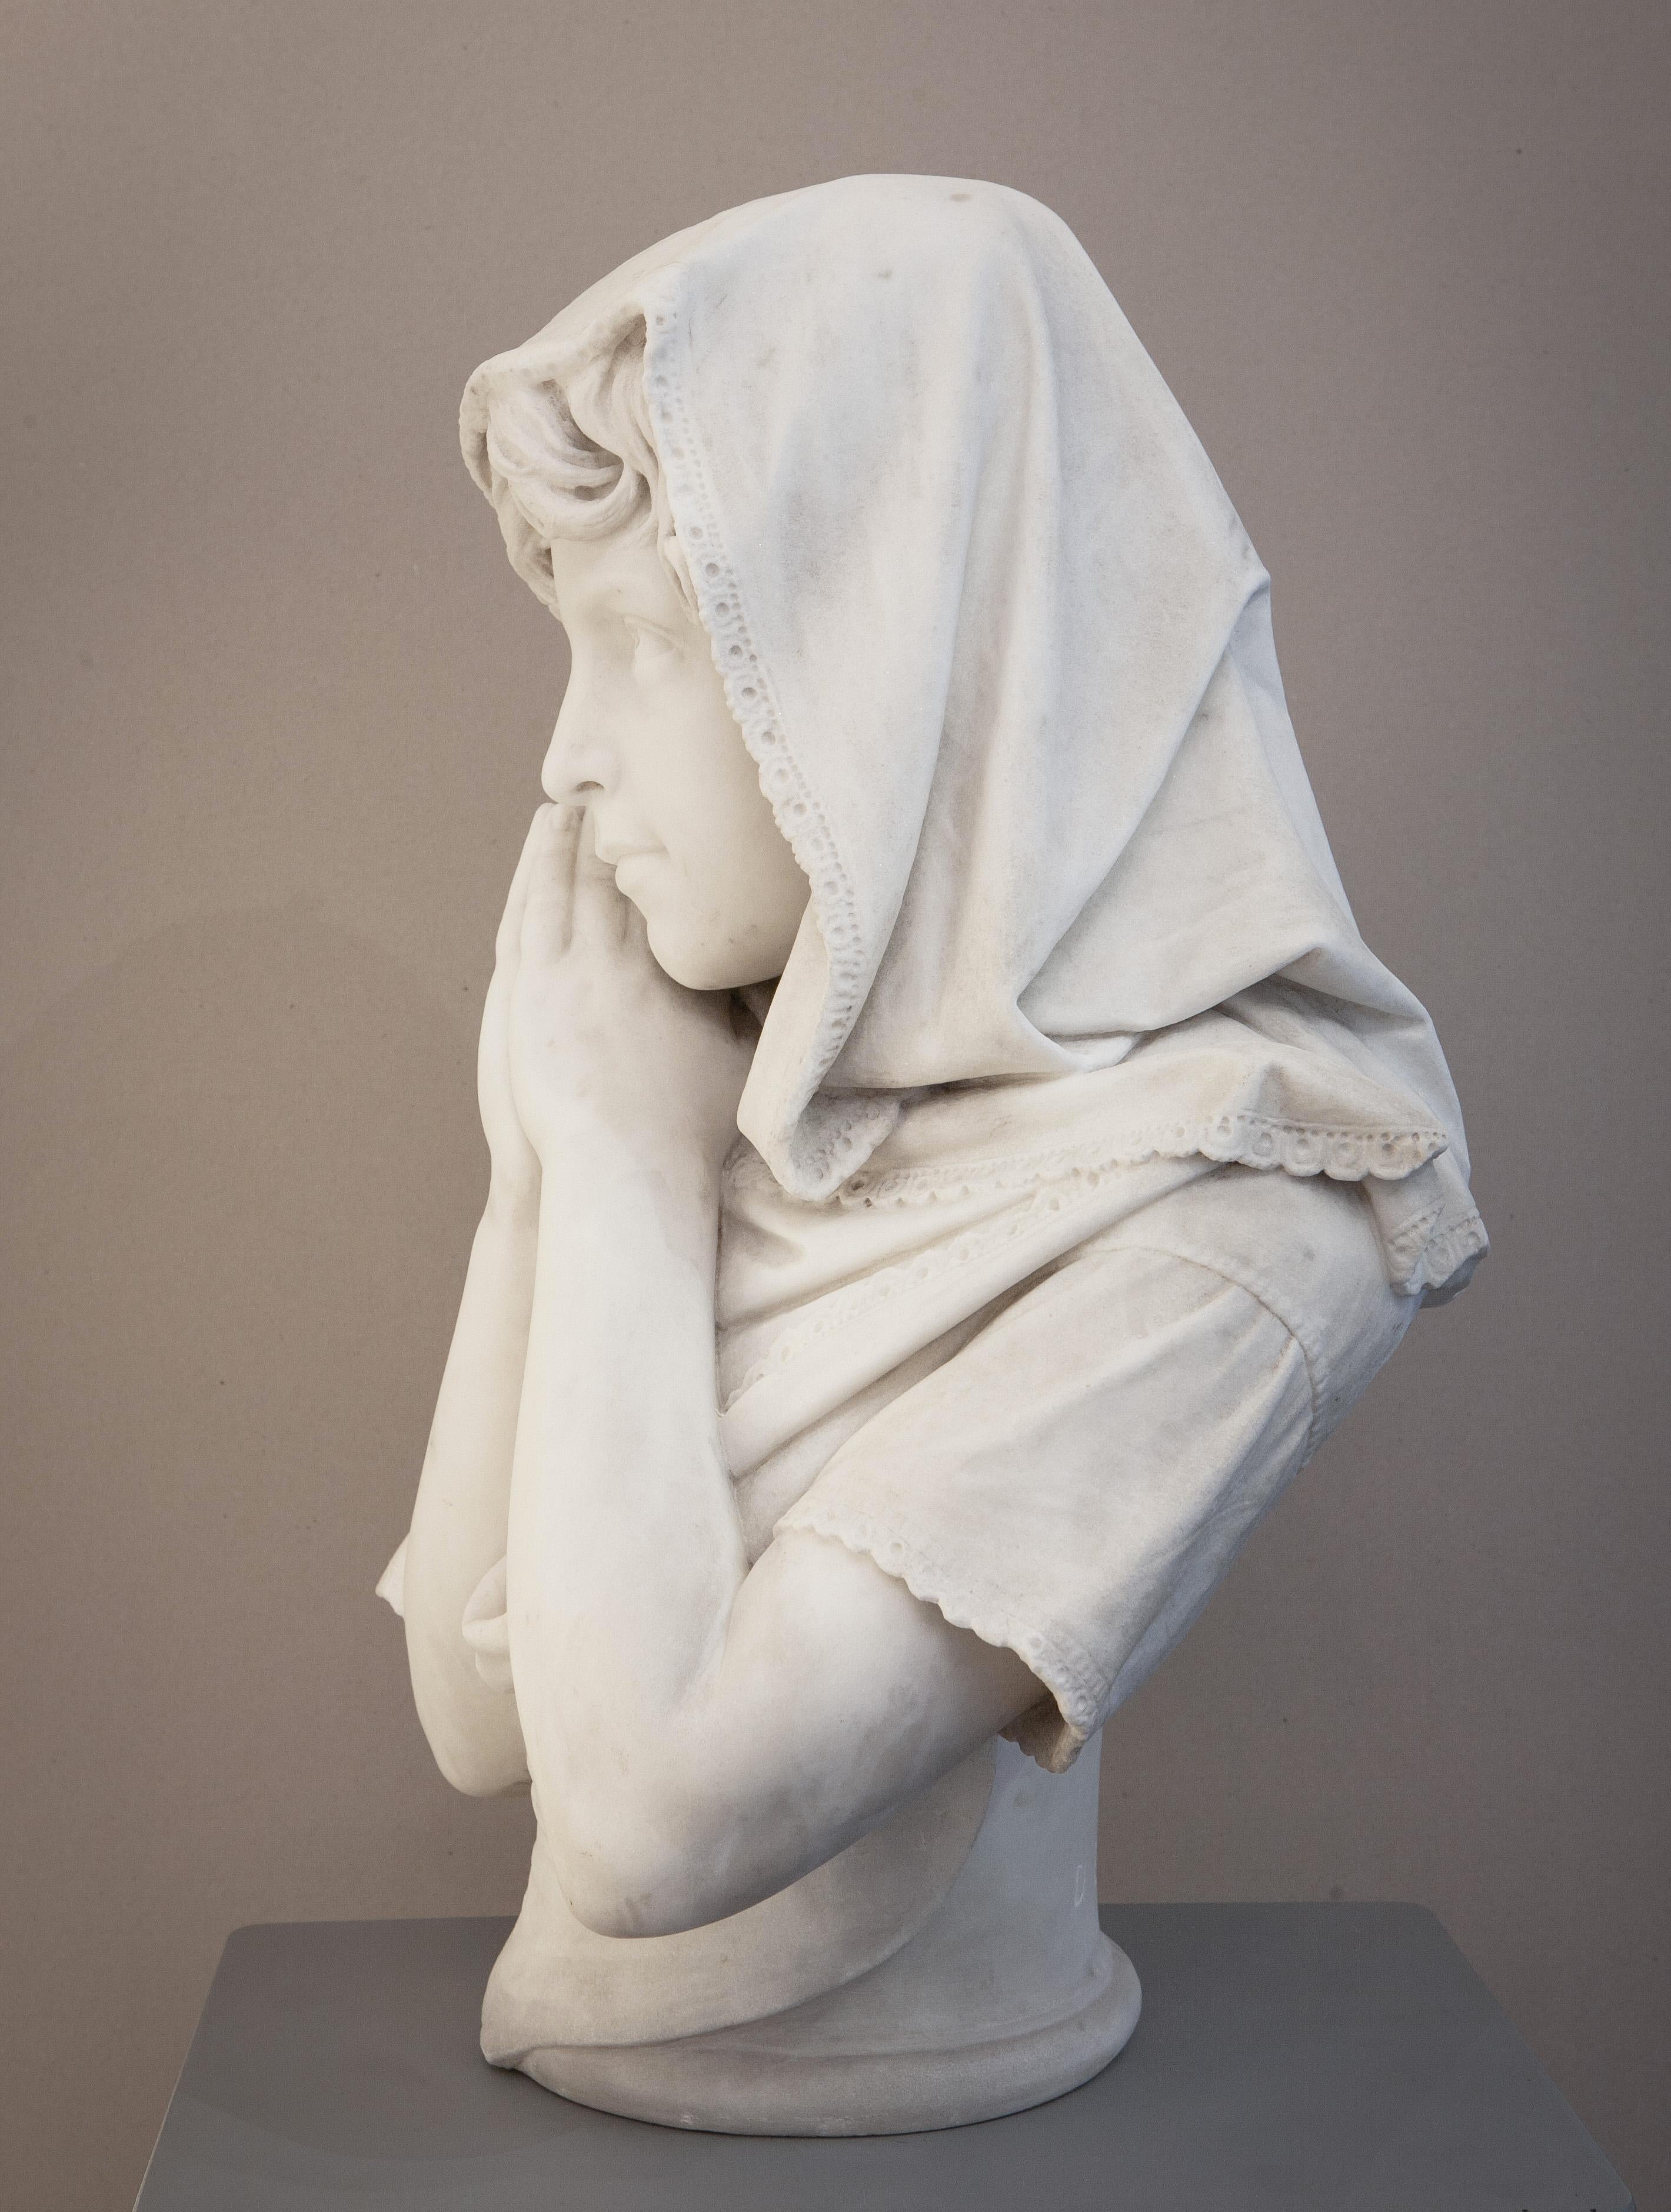 Donato Barcaglia (Pavia, January 10, 1849 - Rome, 1930)

Little girl with clasped hands
Statuary white marble sculpture
Measurements: height 55 cm, width 39 cm, depth 25 cm
Last Quarter 19th Century
Signed 